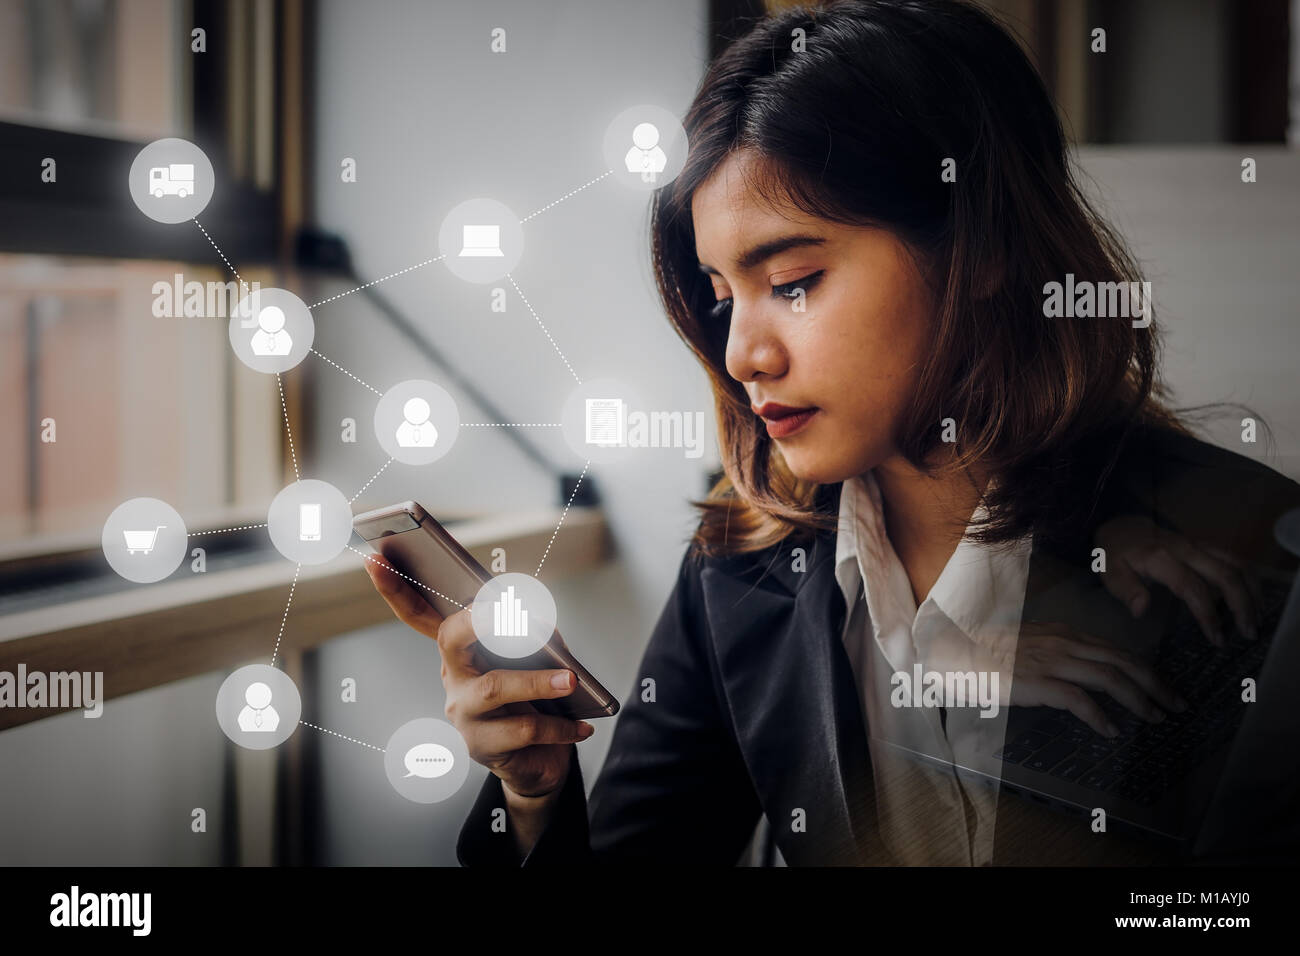 Business woman using smartphone connecting people with digital worldwide. Concept business strategy plan. Stock Photo